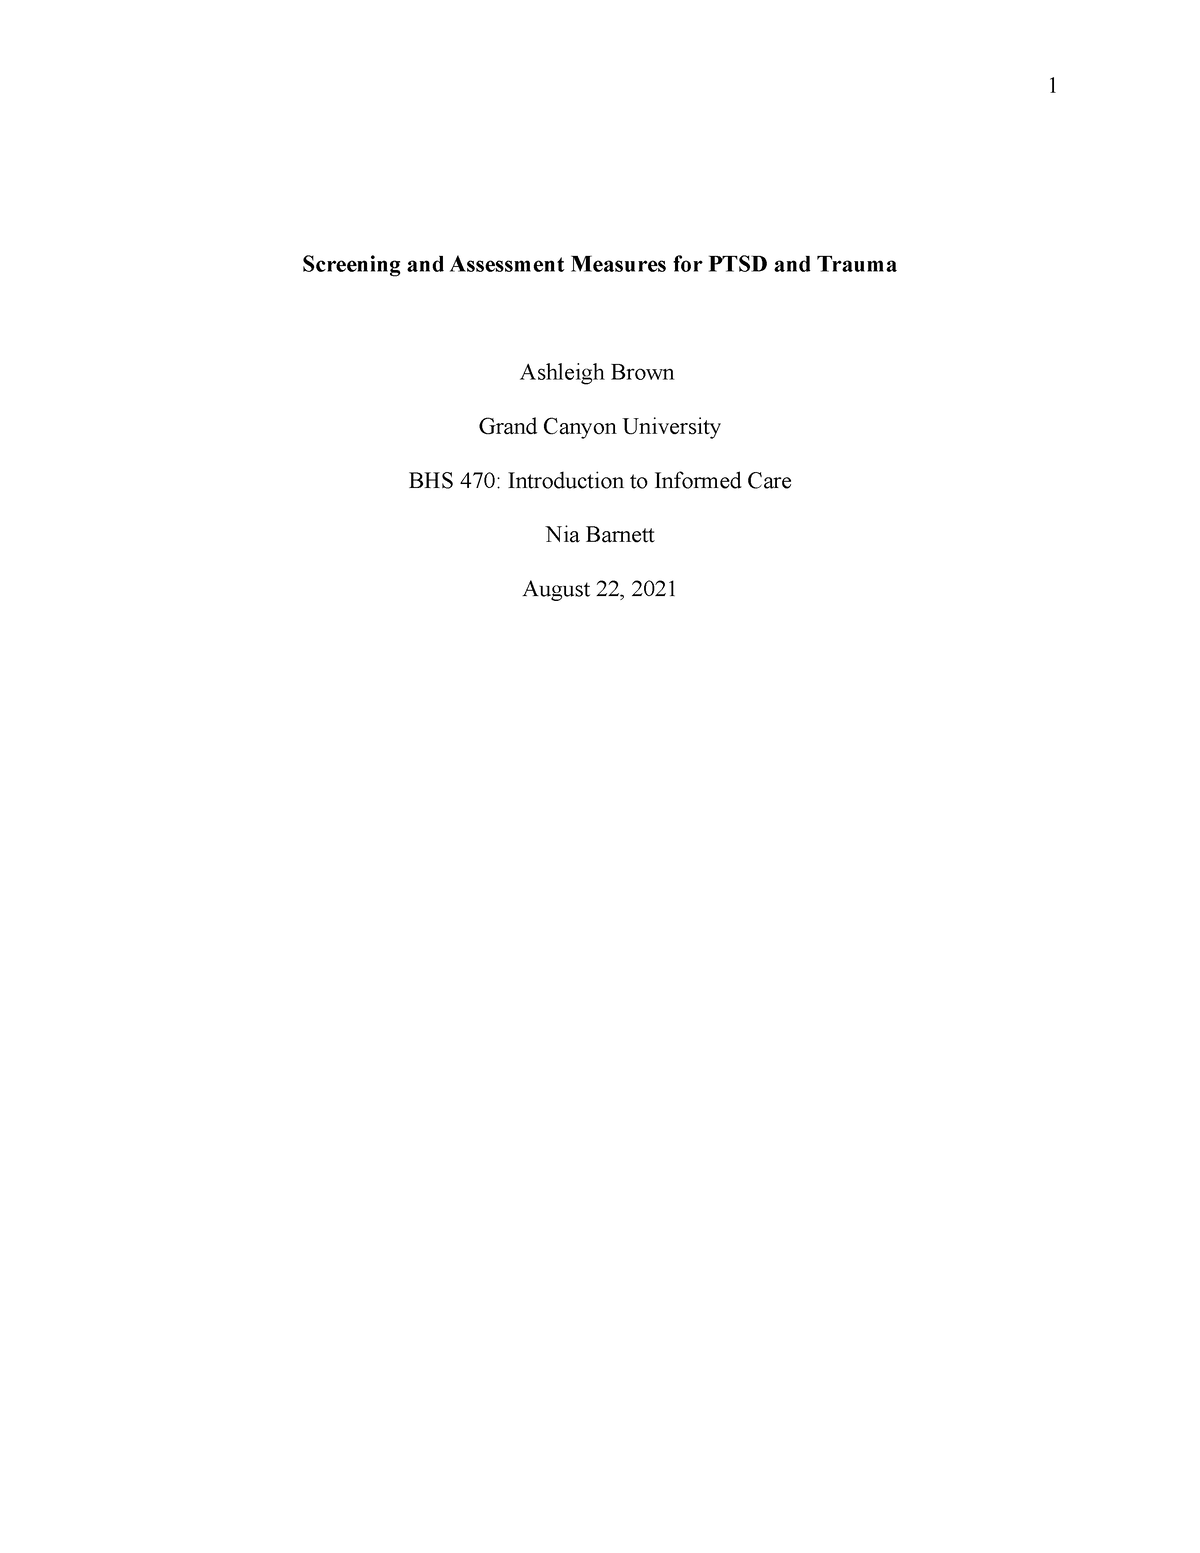 bhs-470-screening-and-assessment-measures-for-ptsd-and-trauma